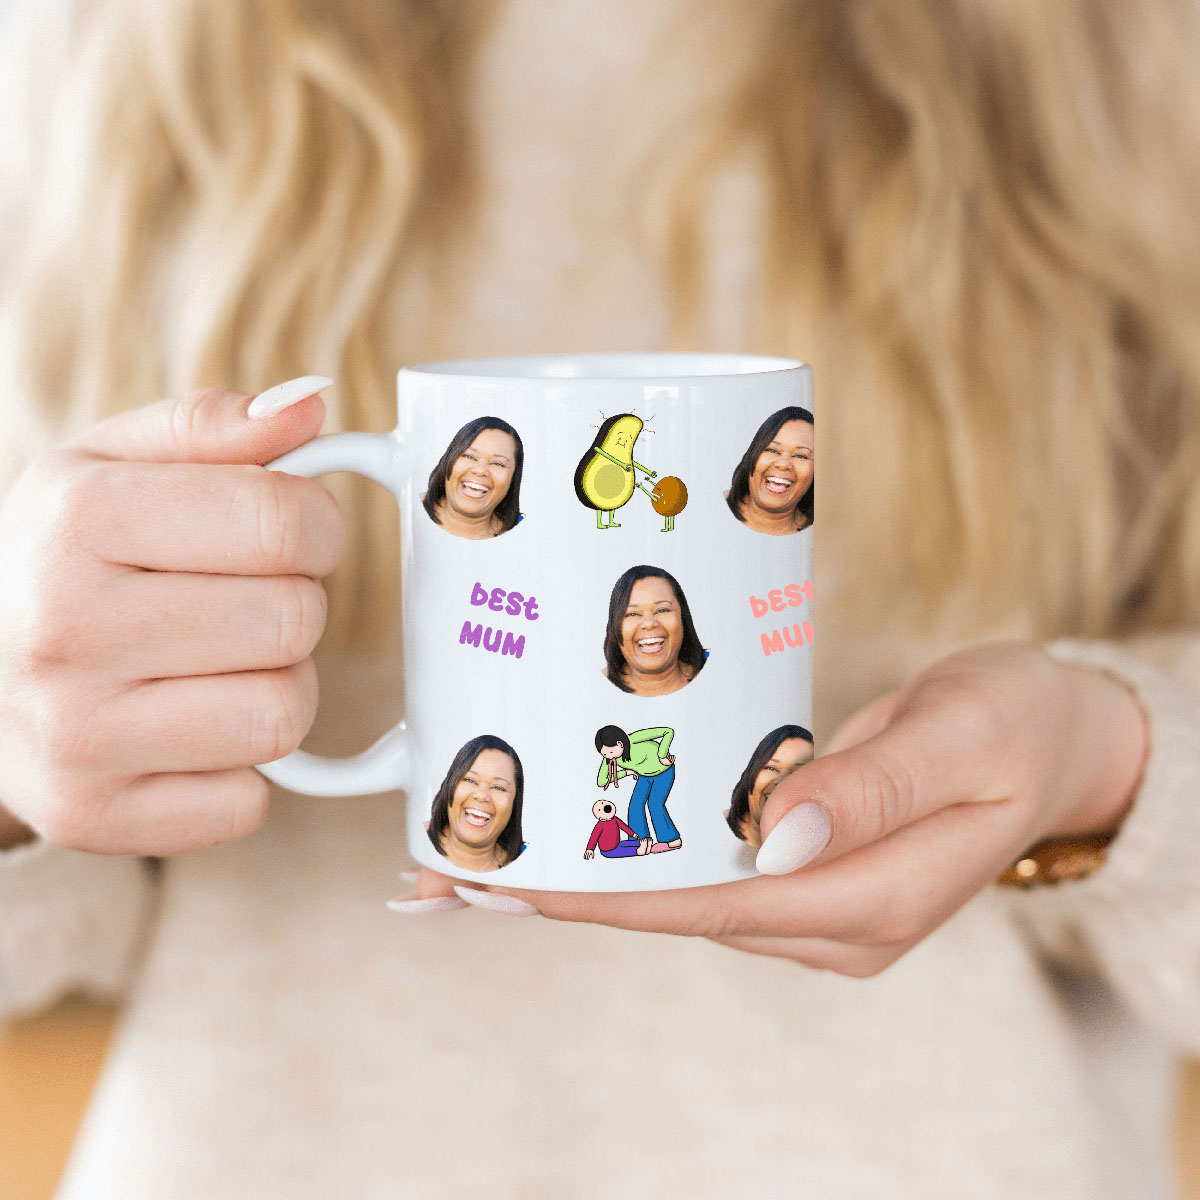 Personalised Mother's Day Mug